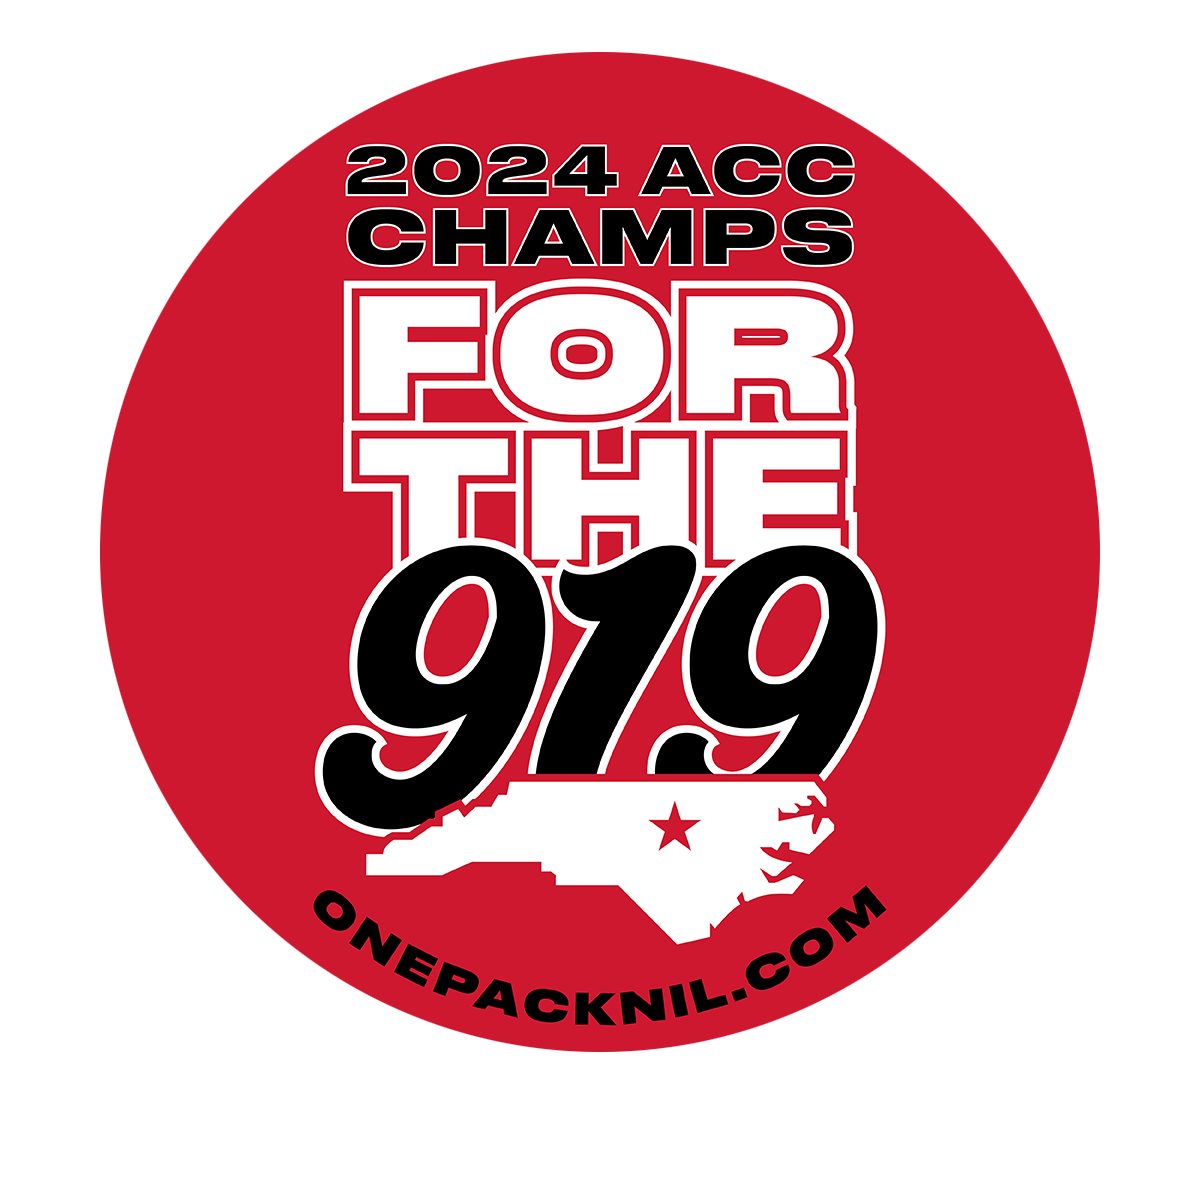 "For the 919" Decal